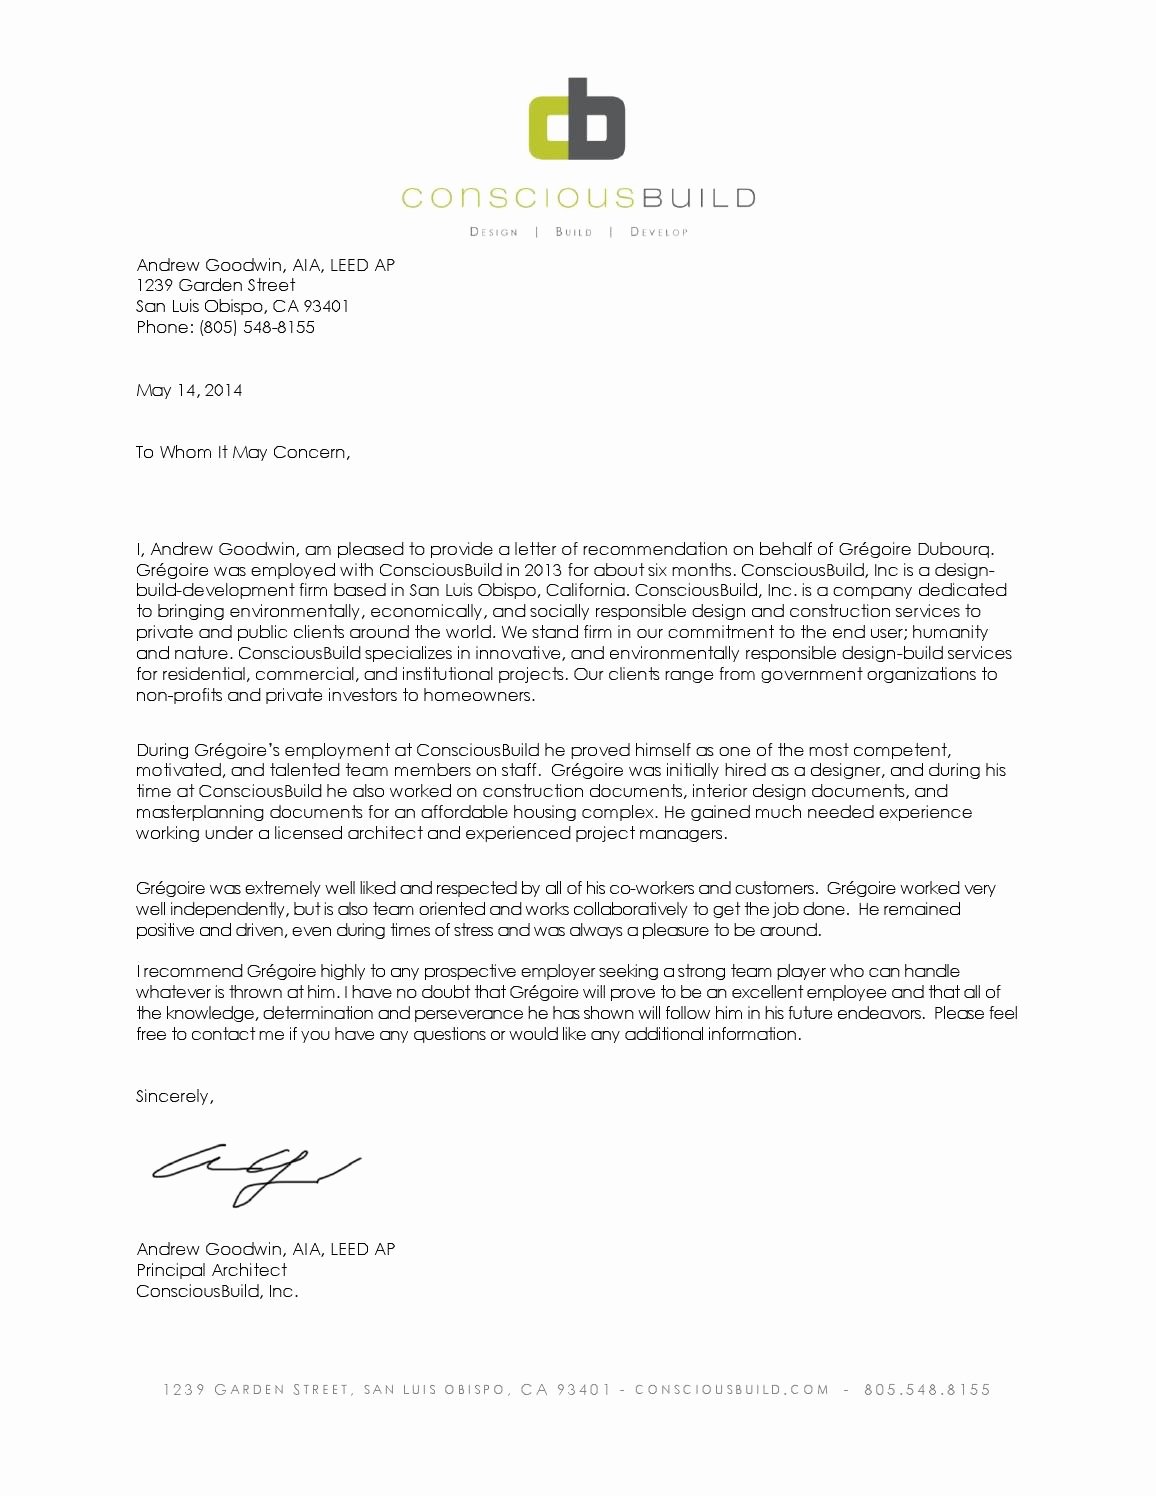 Leed Letter Template Awesome Letter Of Re Mendation Intern Architect by Gregoire